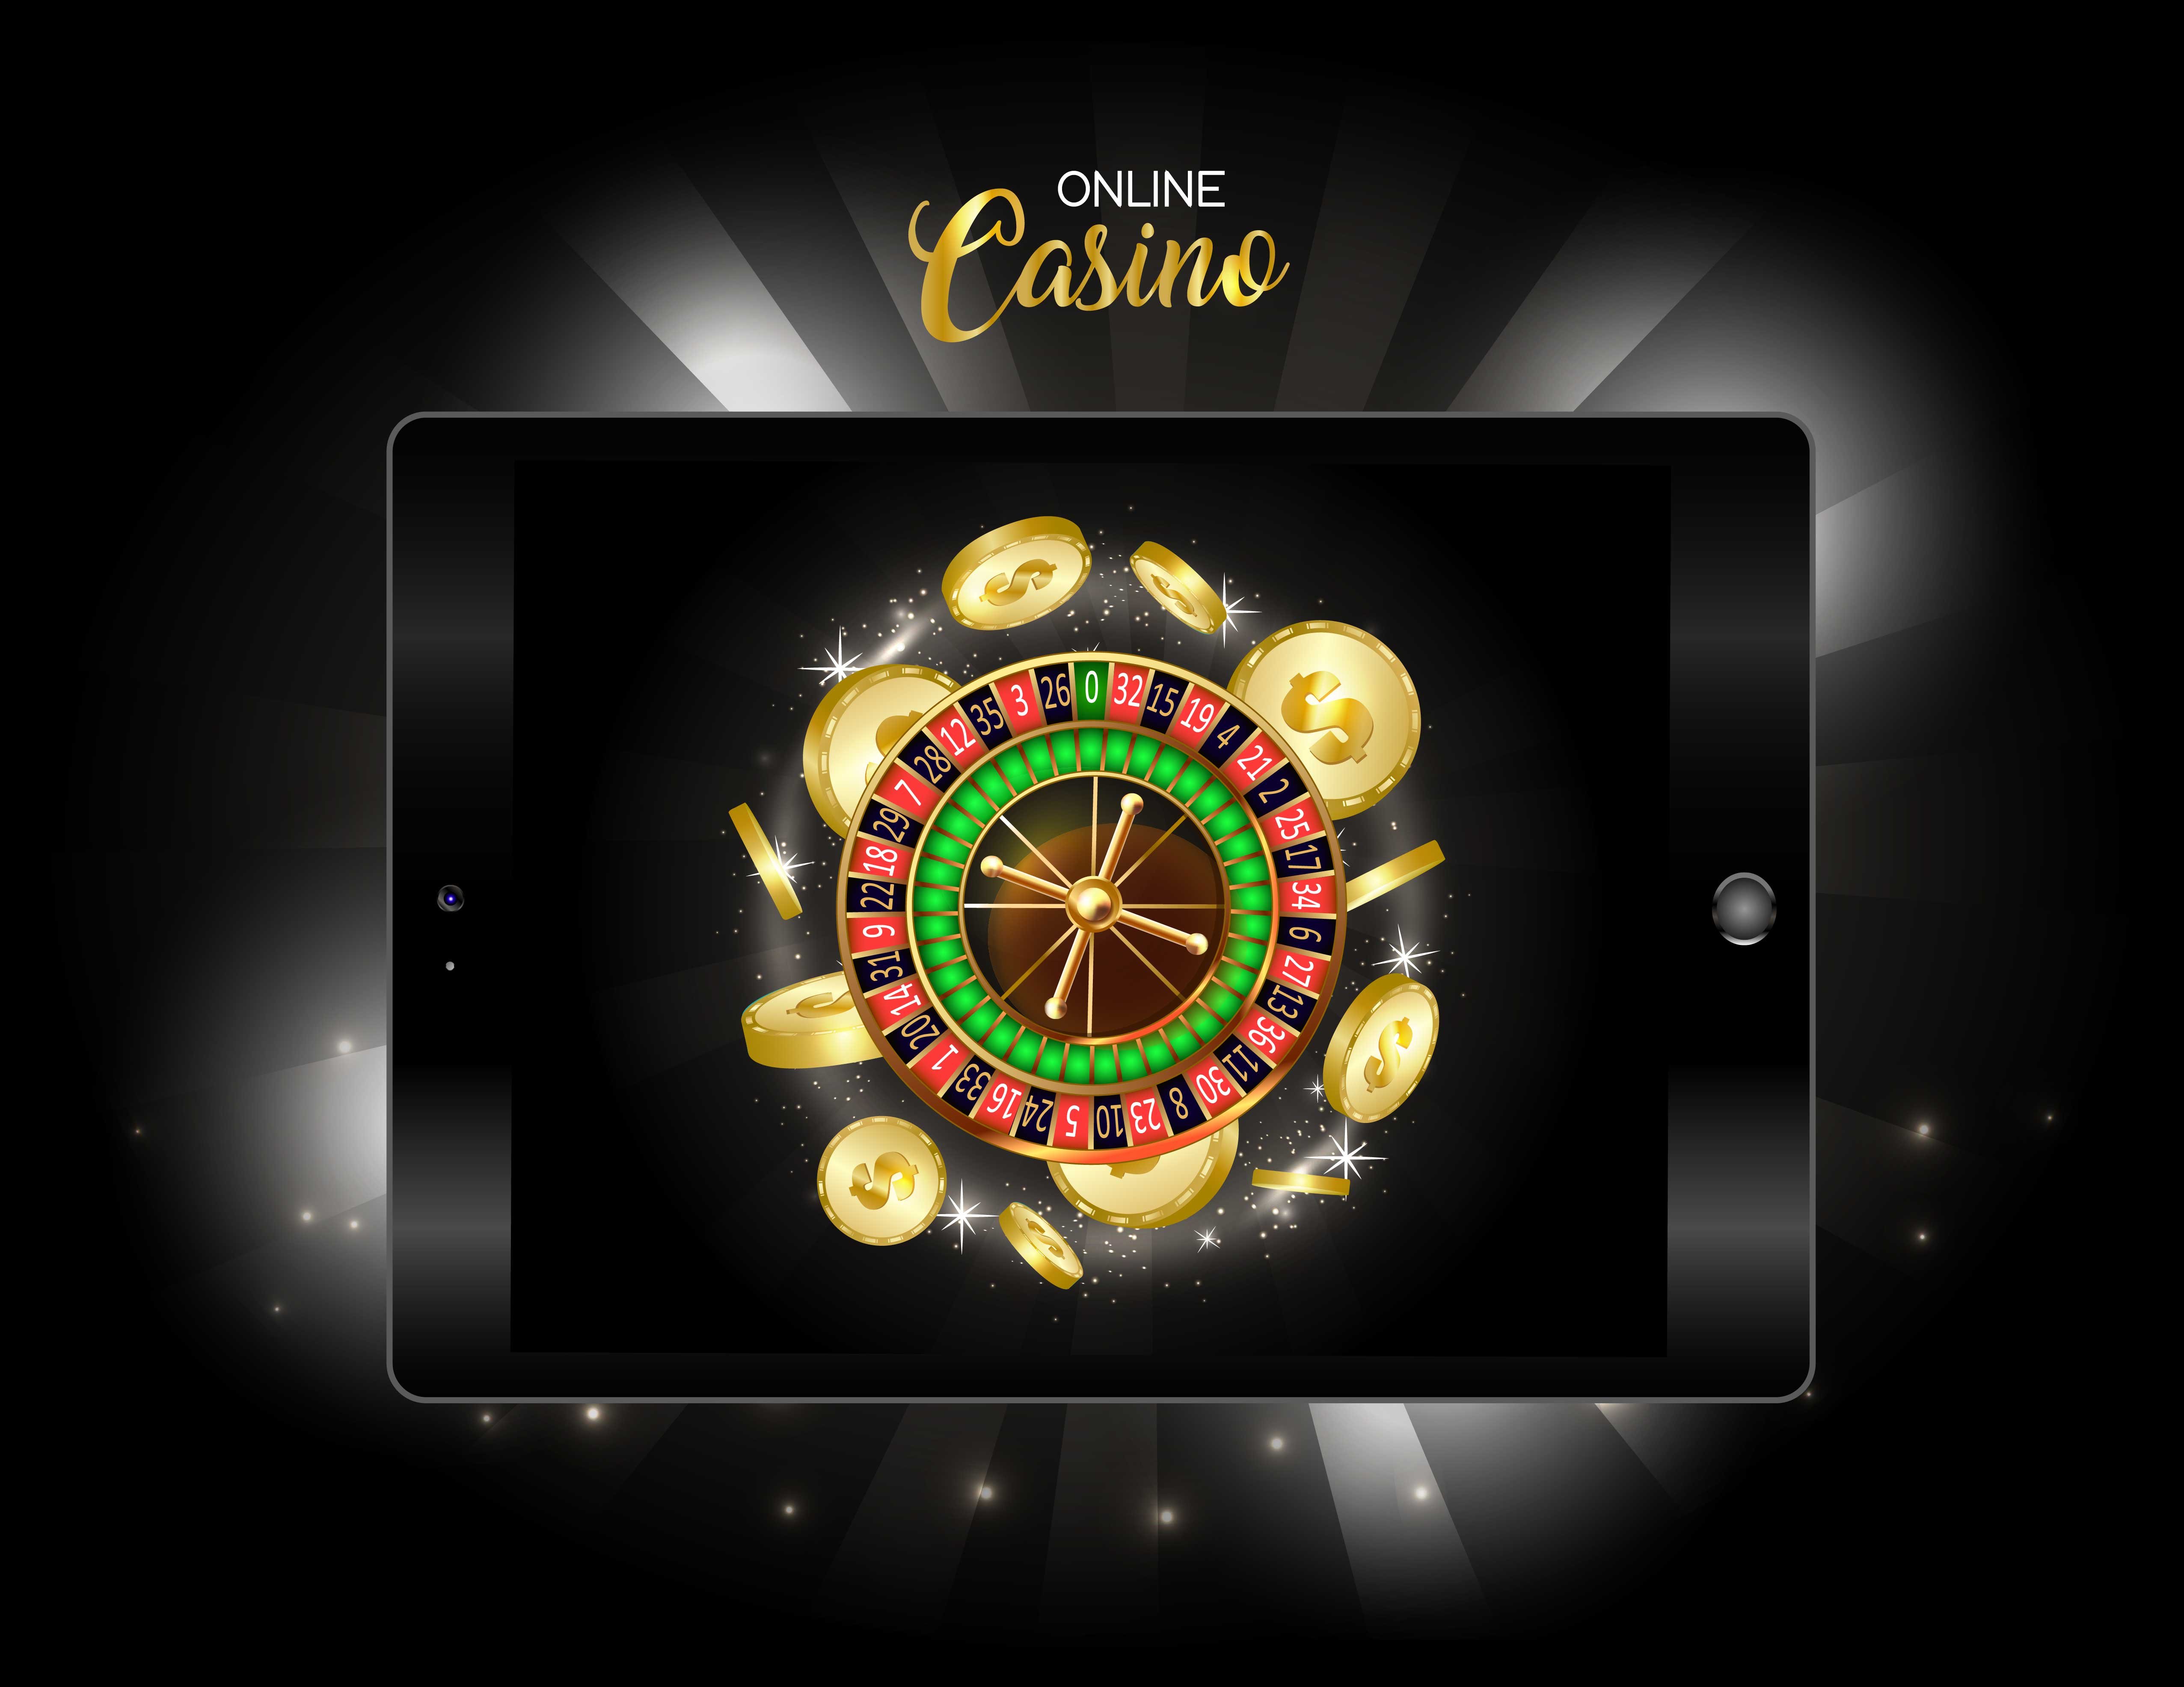 Casino Games » Play Online Casino Games in India 